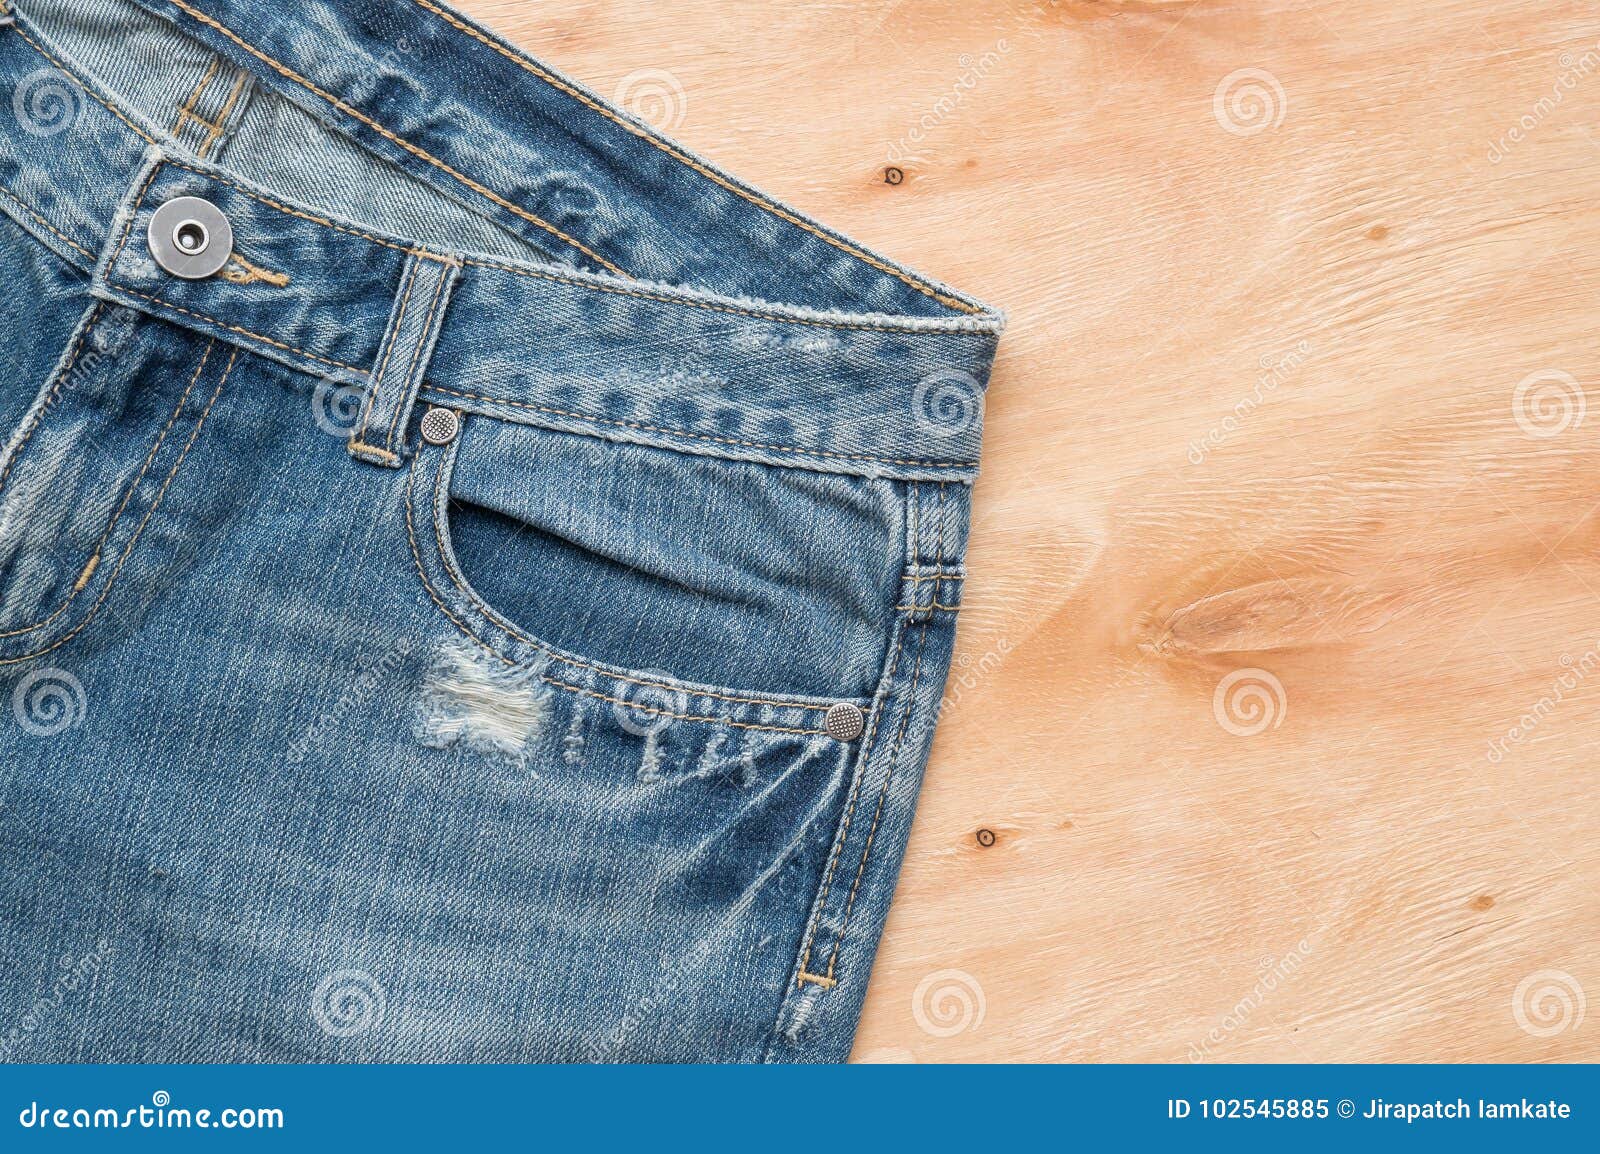 Part of fashion jeans stock image. Image of garment - 102545885